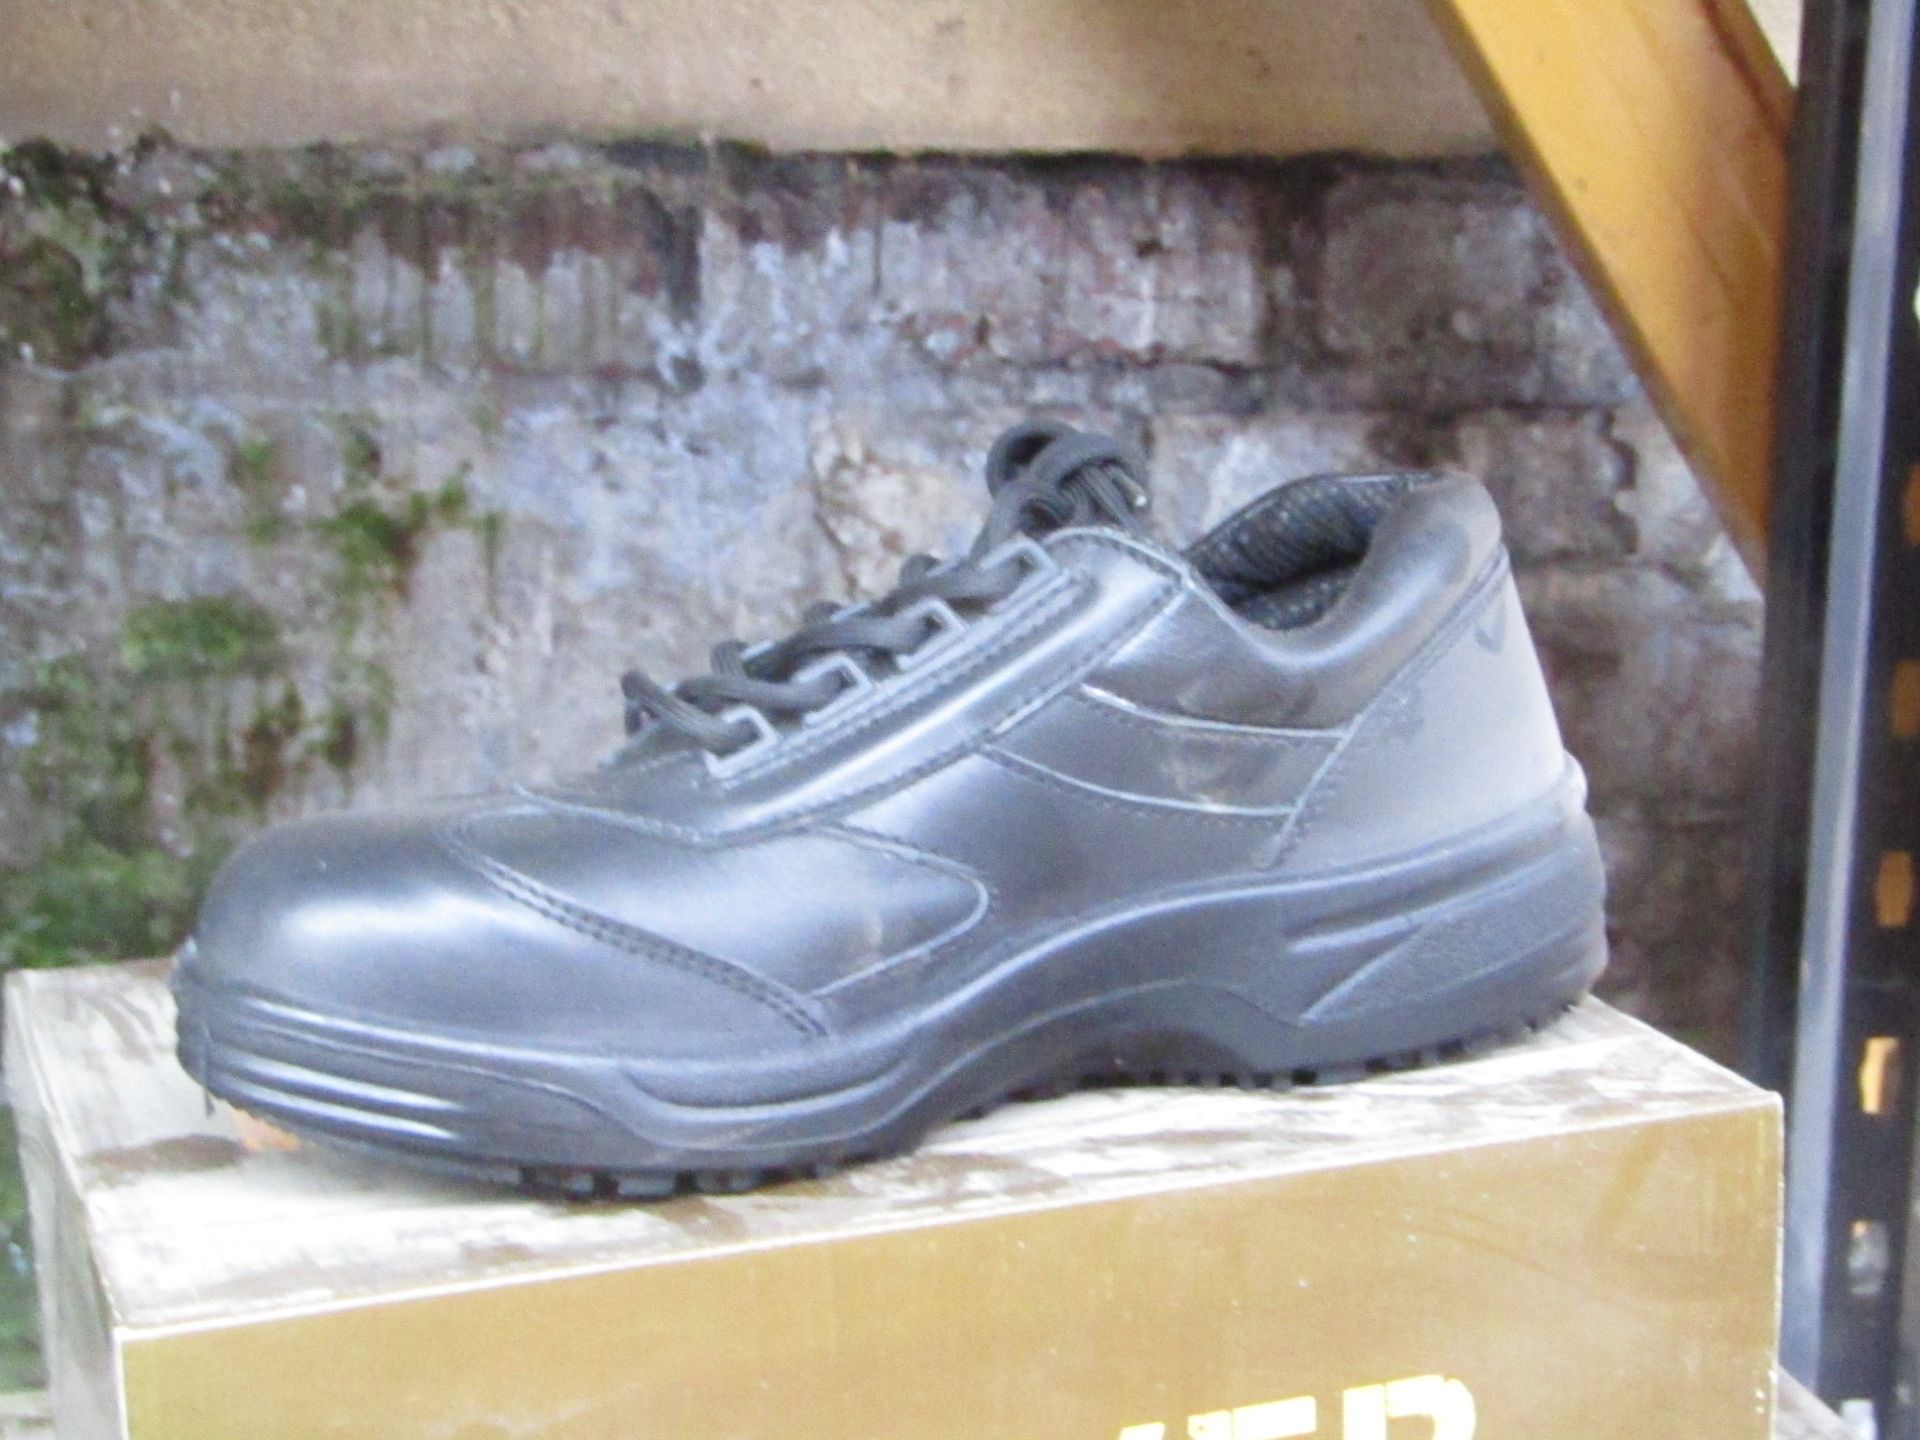 Beaver Steel Toe Cap safety Trainer Shoes, new size 7 RRP £23.99